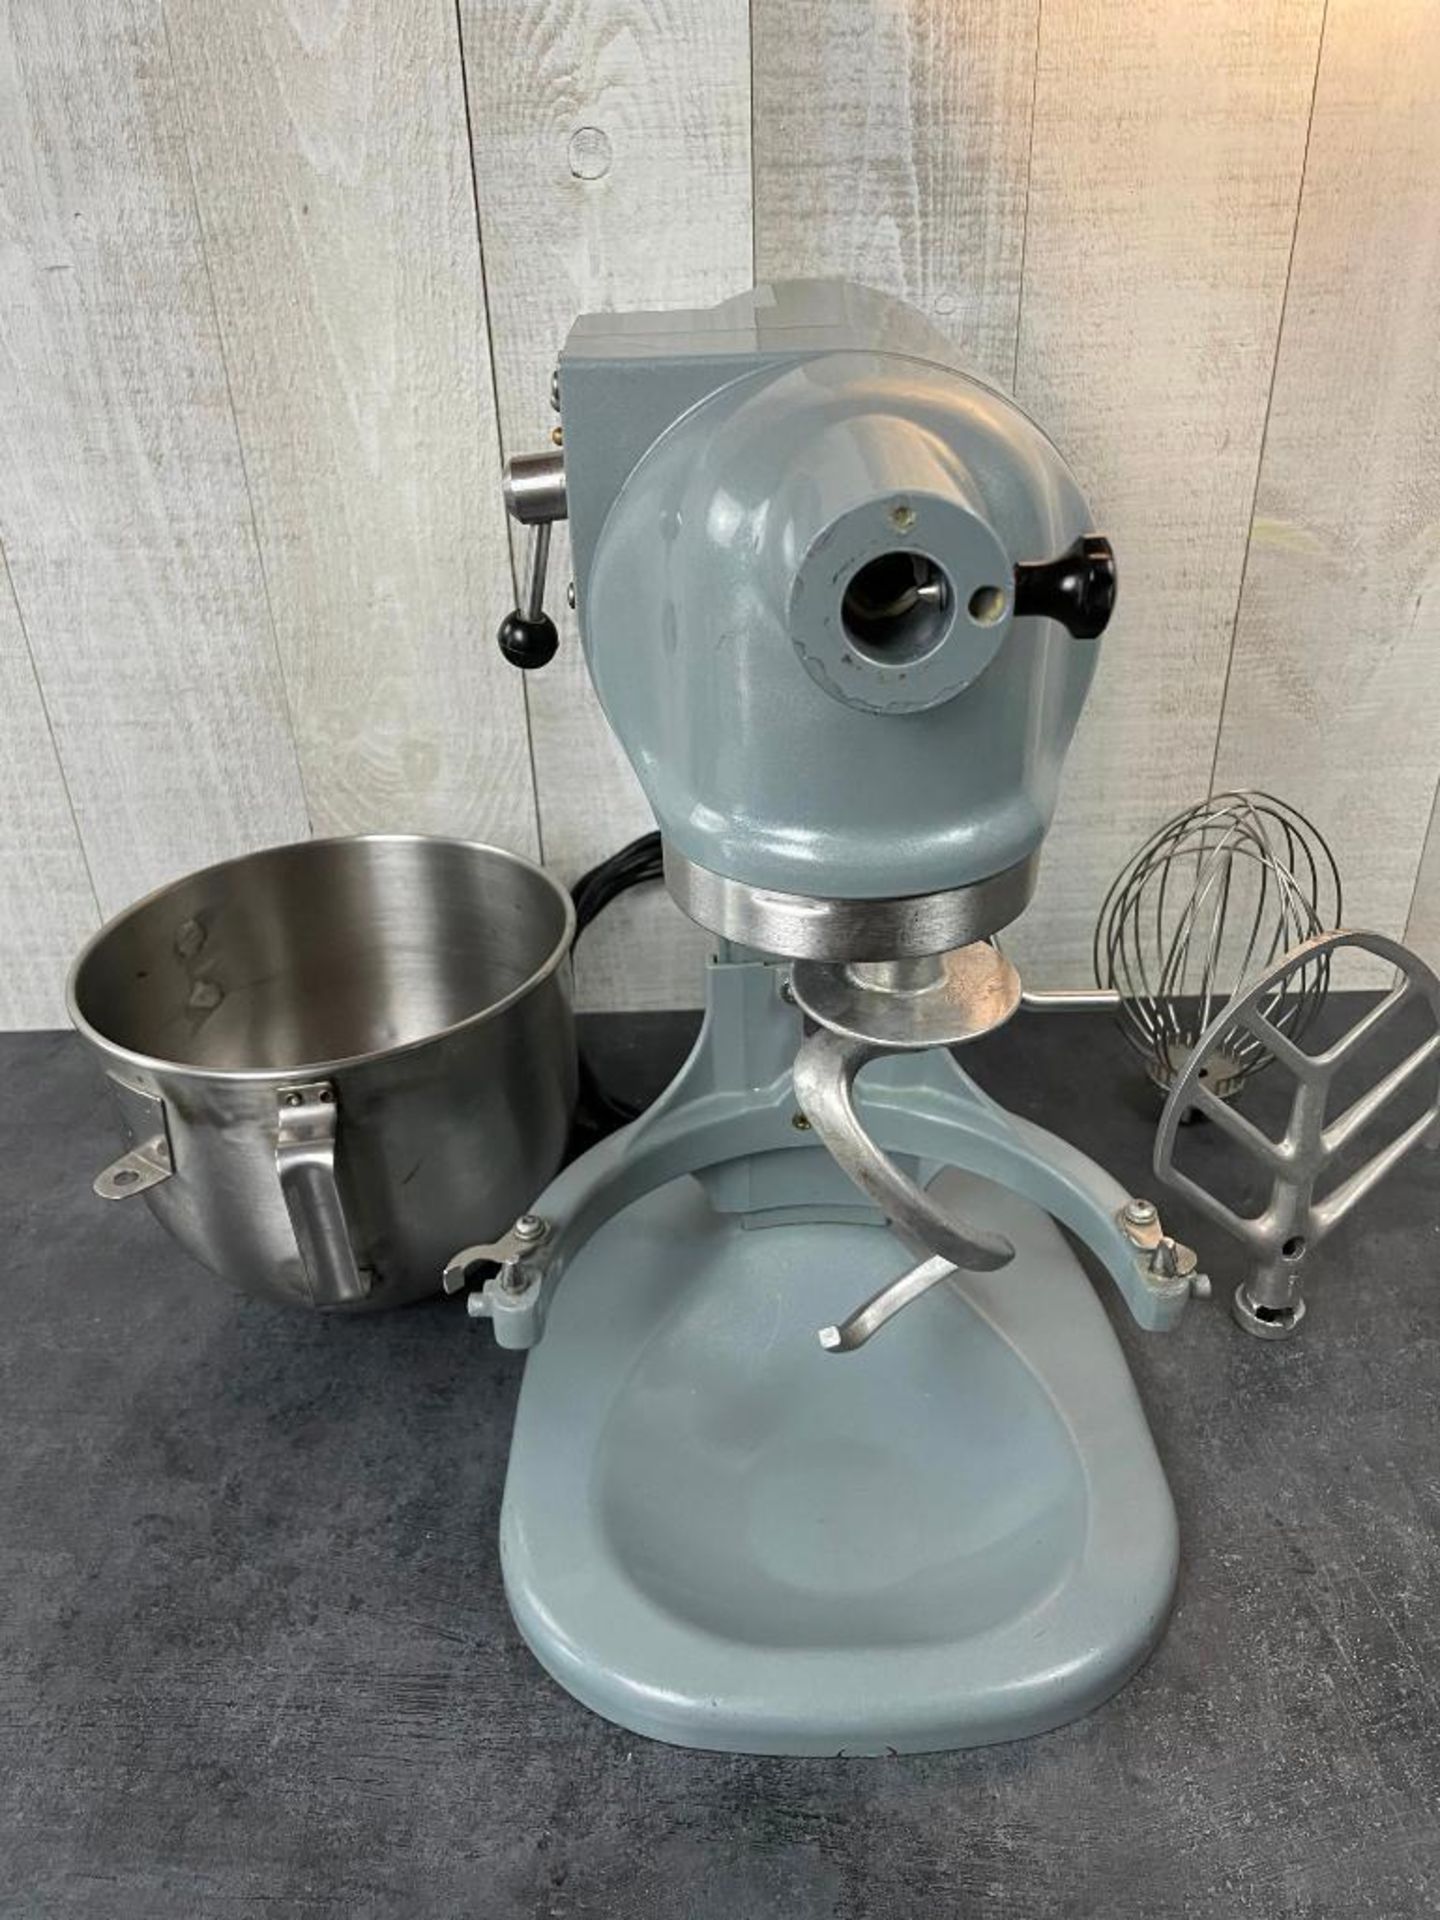 HOBART N50 5QT MIXER WITH HOOK, WHIP, PADDLE - Image 7 of 9